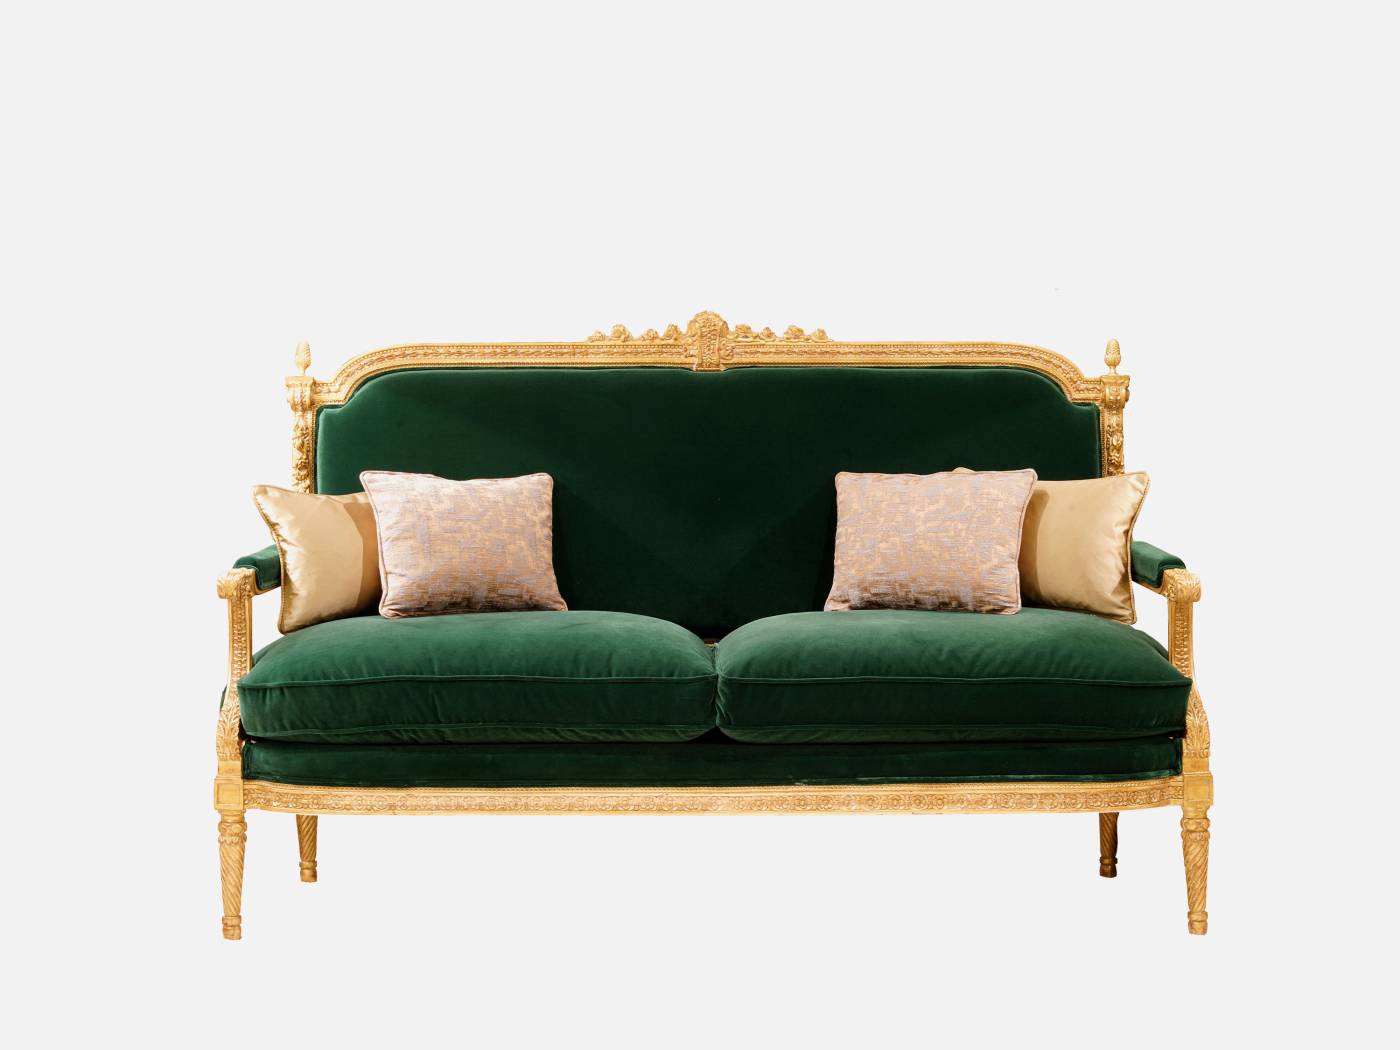 ART. 756-2 – The elegance of luxury classic Sofas made in Italy by C.G. Capelletti.